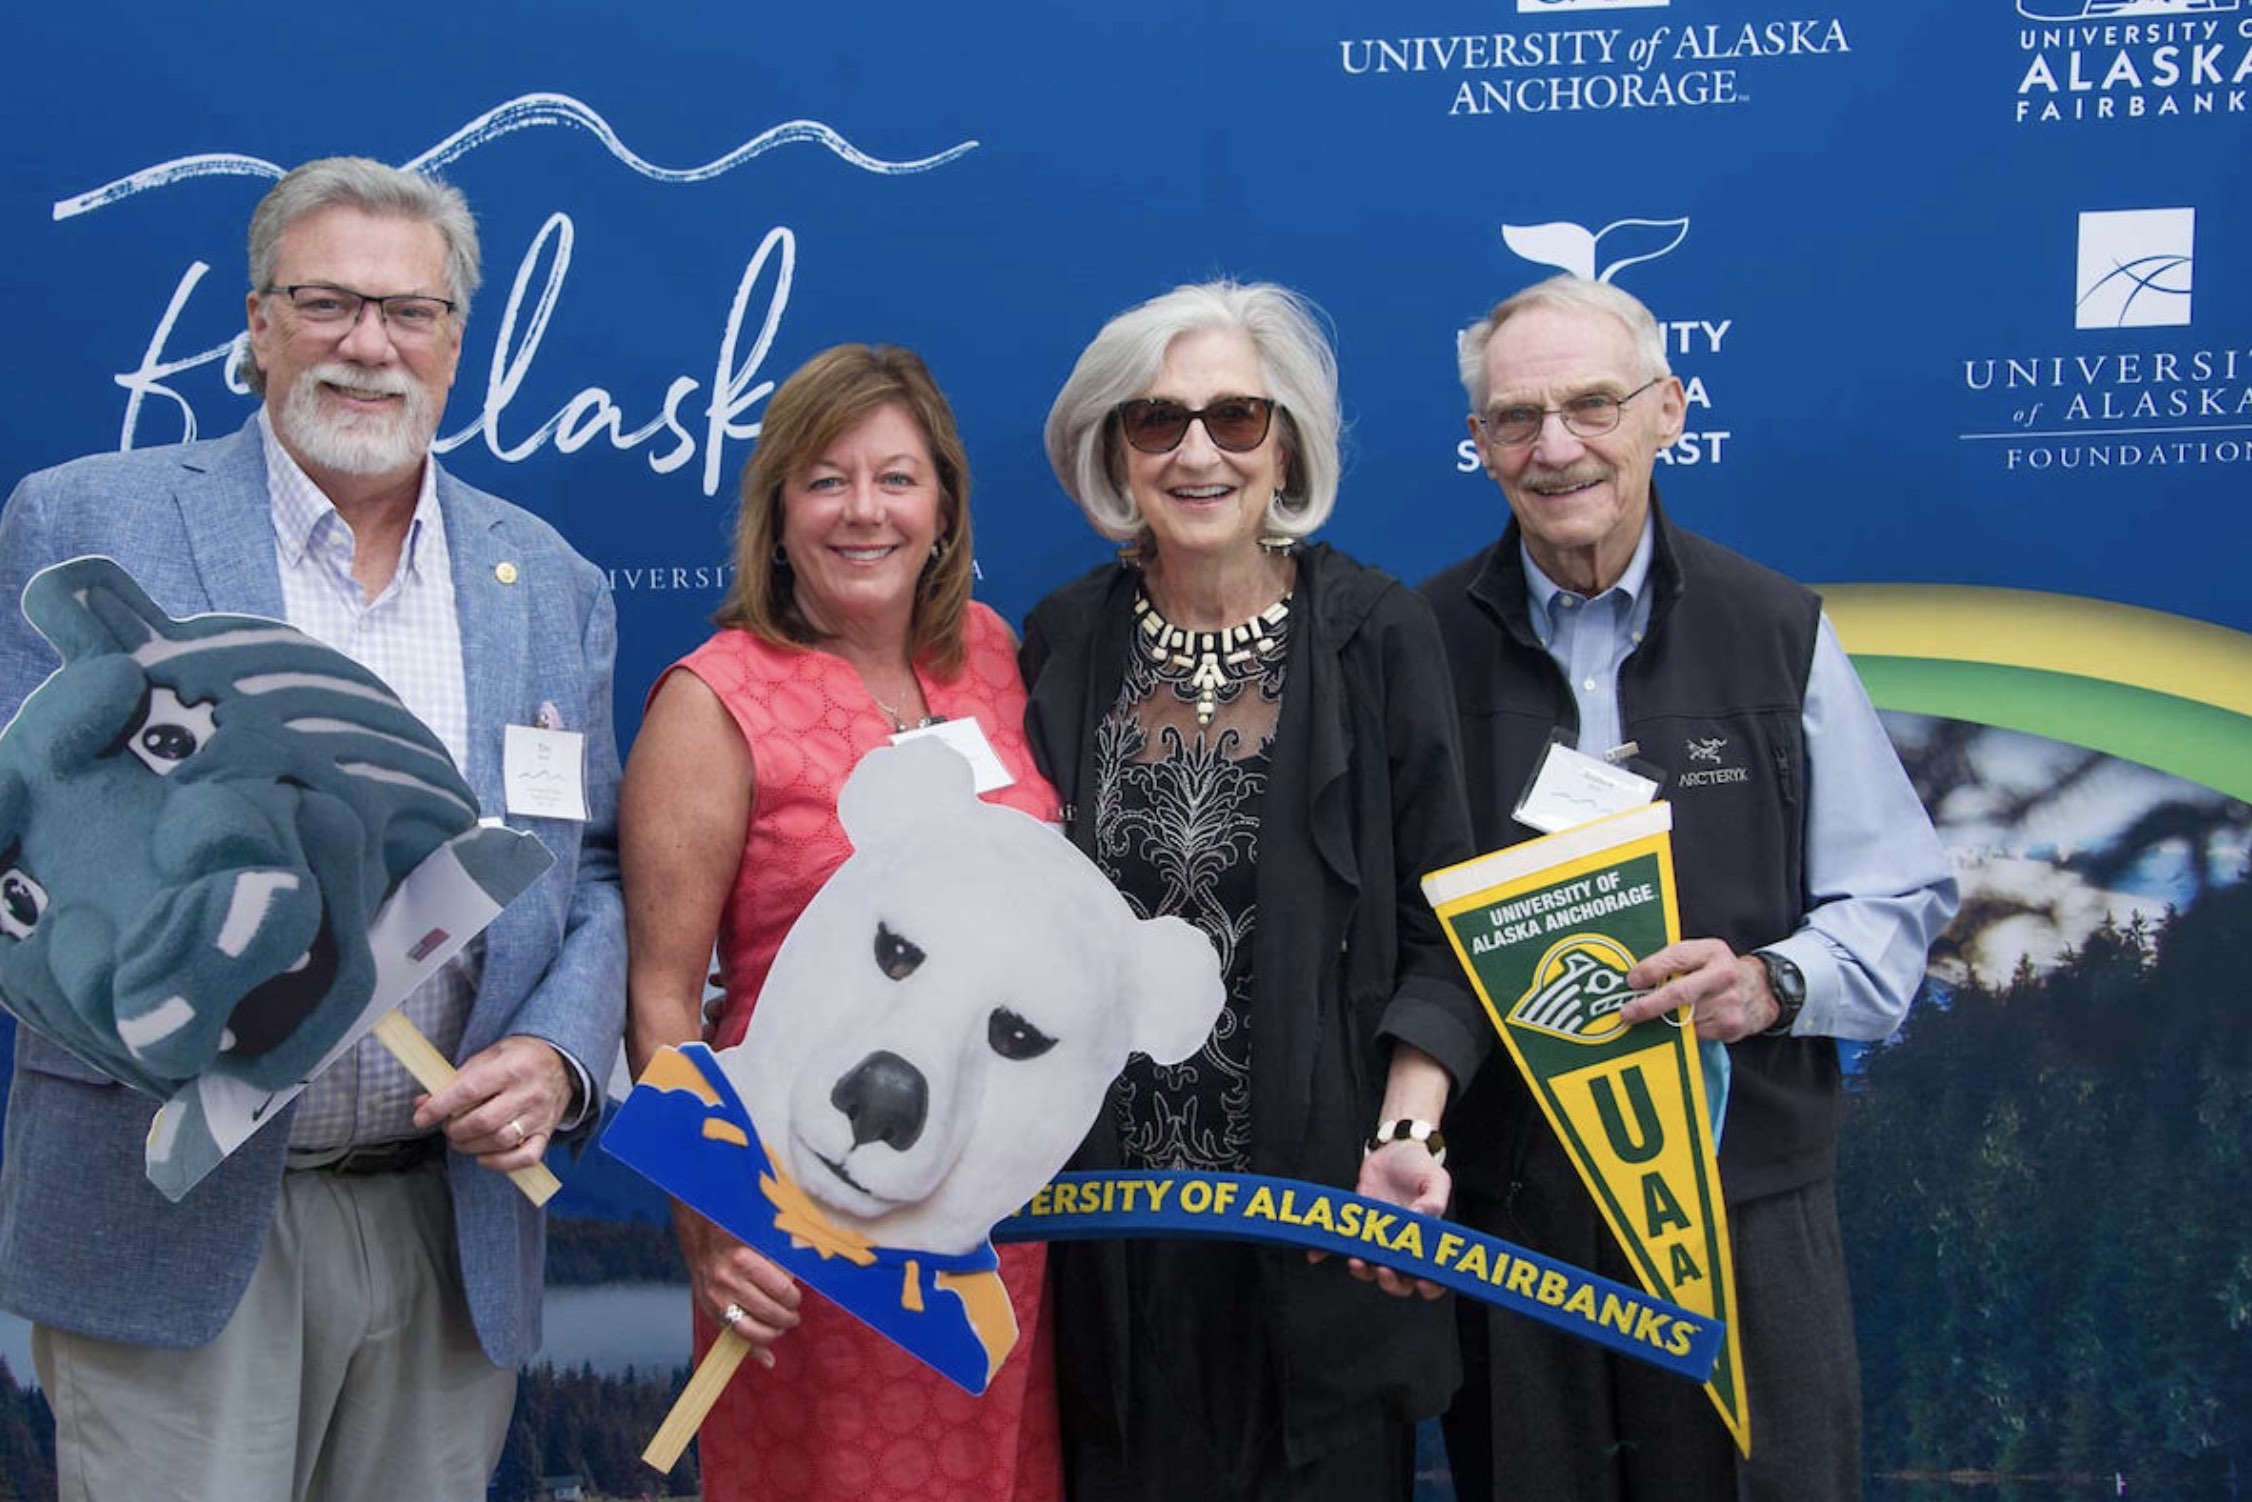 (From left to right) Tim Brady (BOR 2005 - 2015) and Betty Brady, with Mary K. Hughes (BOR 2002 - 2025; BOD 1989 - current) and Andrew Eker in front of a blue UA Foundation backdrop. 